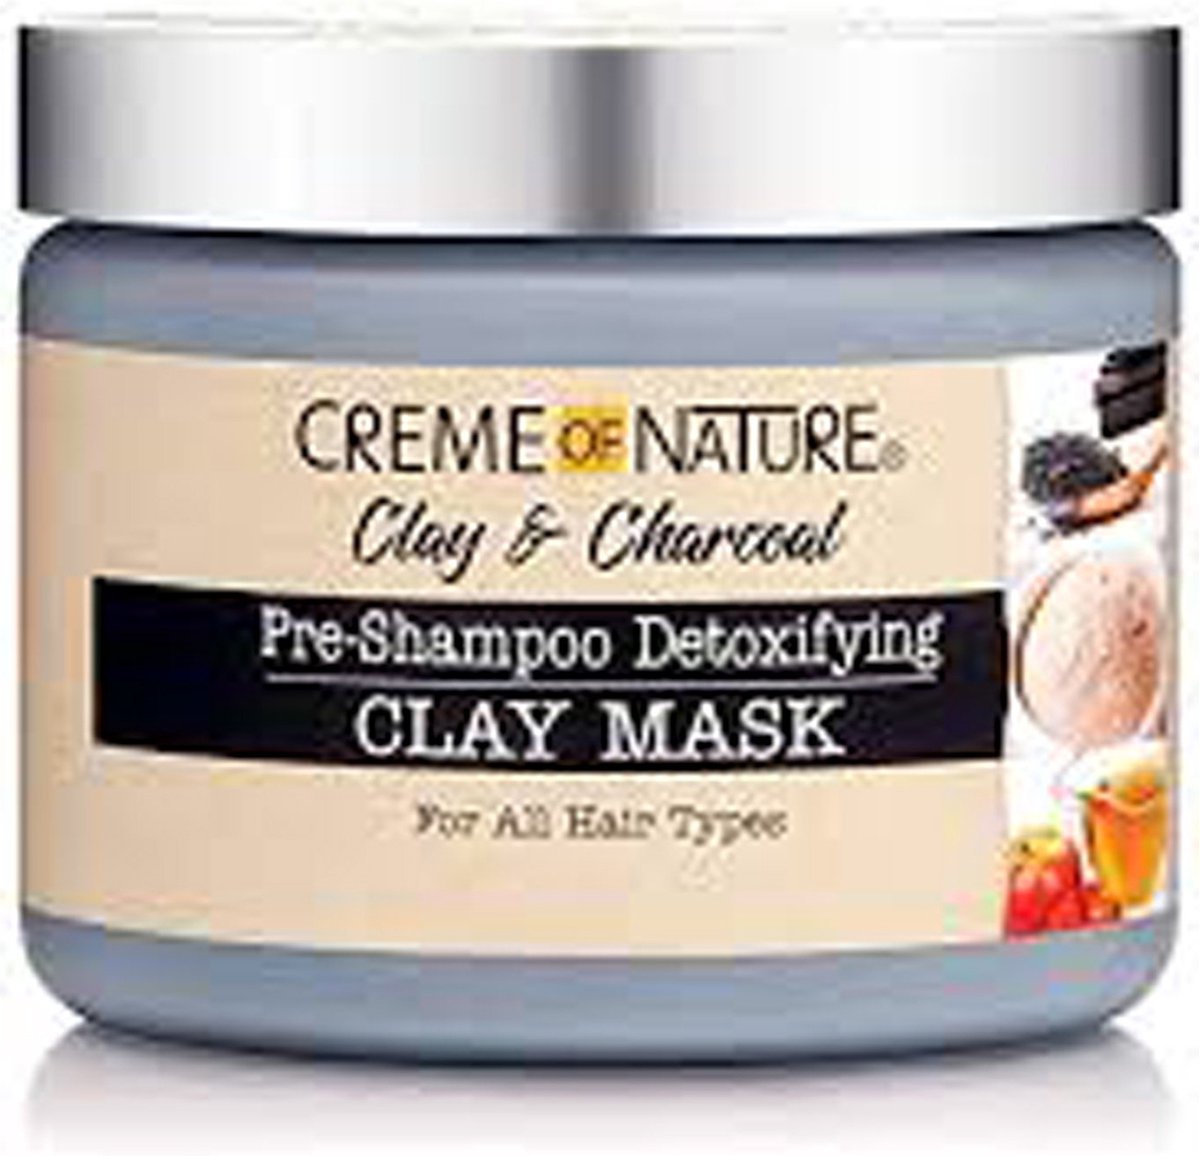 Creme of Nature Clay & Charcoal Pre Shampoo Detoxifying Clay Mask 326gr